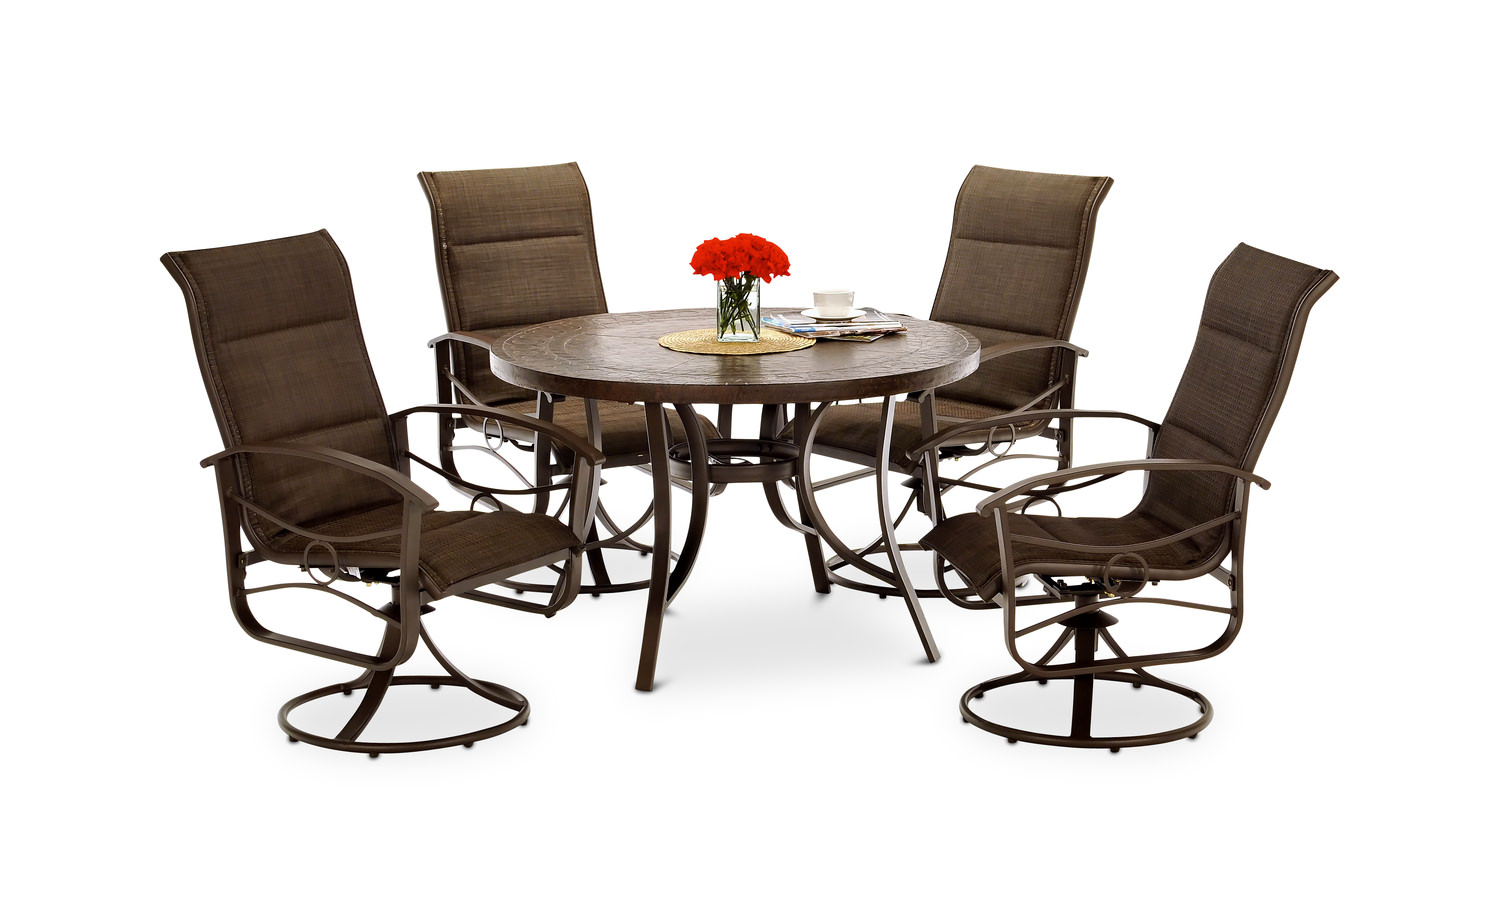 Callaway Iii 5 Piece Patio Dining Set Furniture Creations Direct intended for sizing 1500 X 916